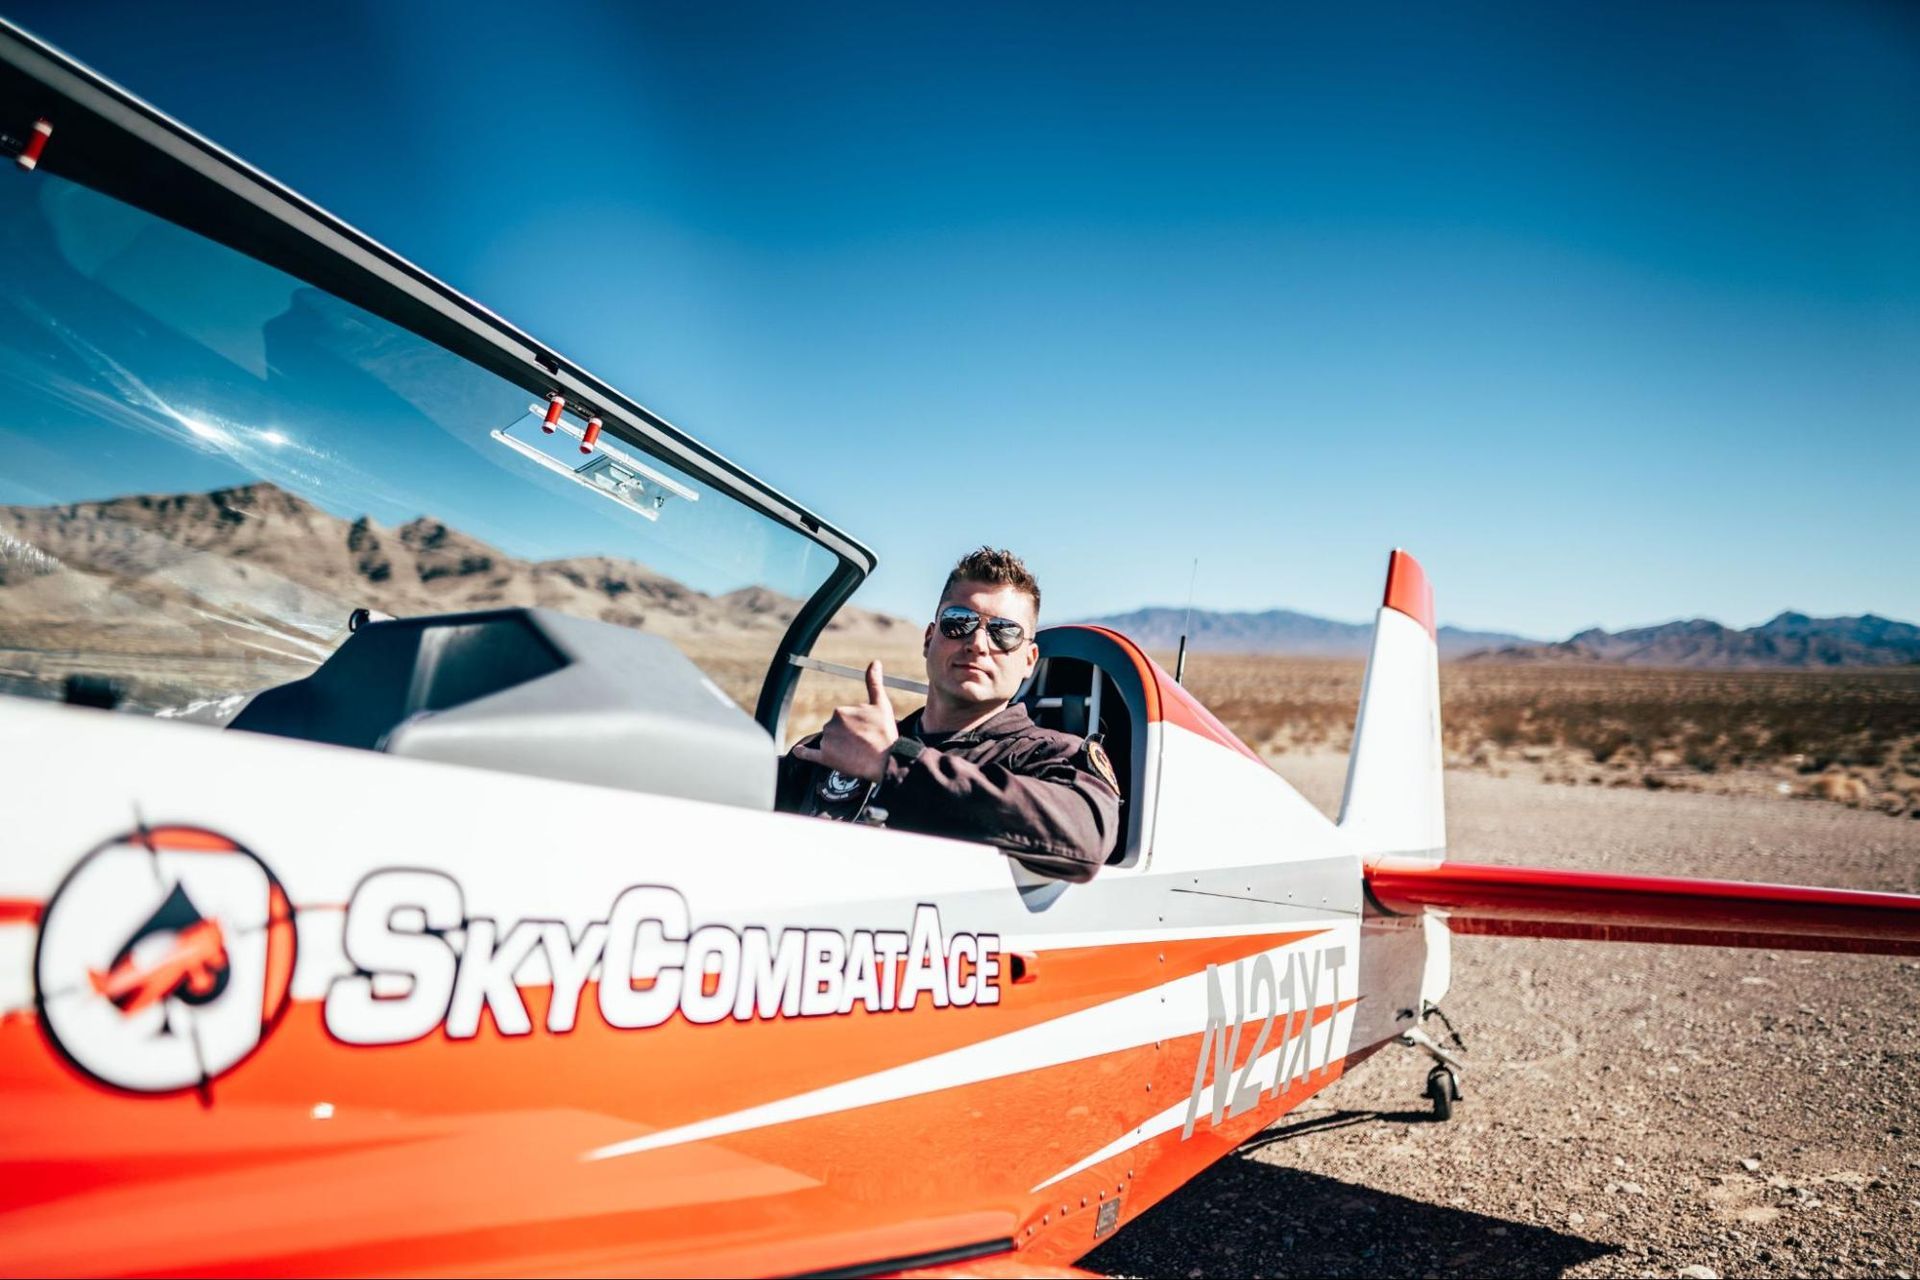 A pilot giving the thumbs up while sitting in a Sky Combat Ace plane, a San Diego outdoor activity.